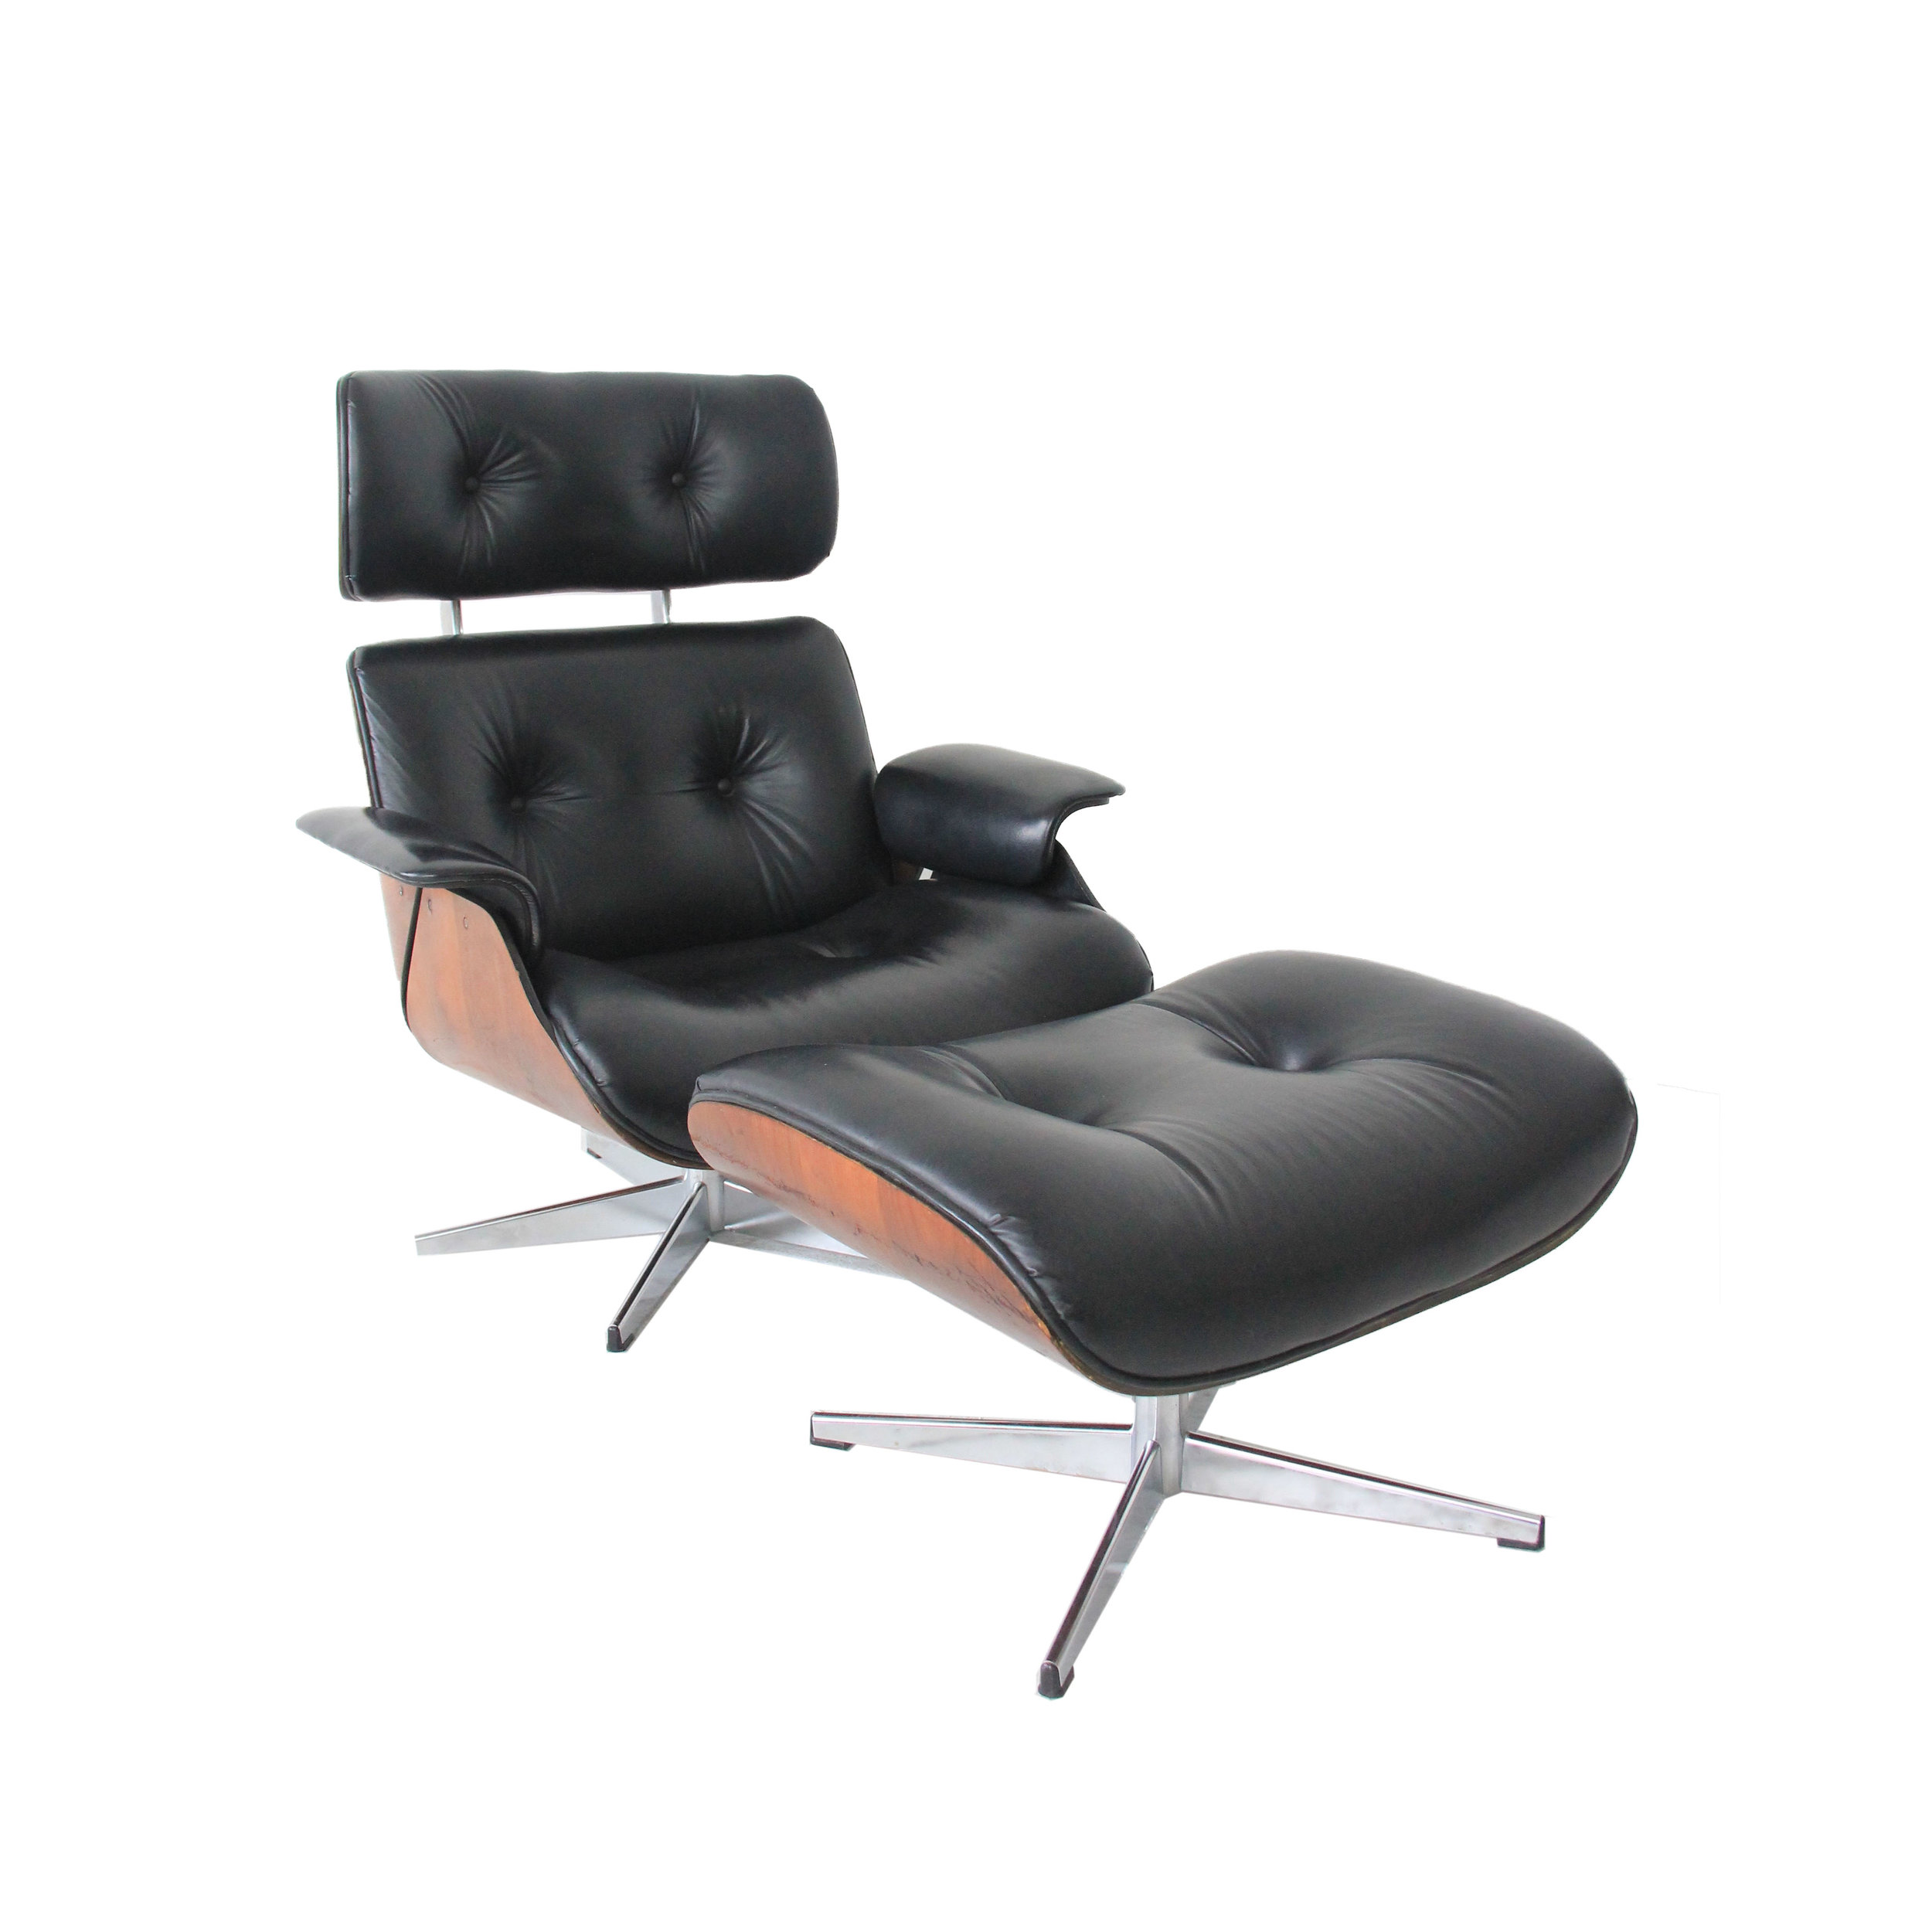 vintage eames lounge chair by plycraft.jpg